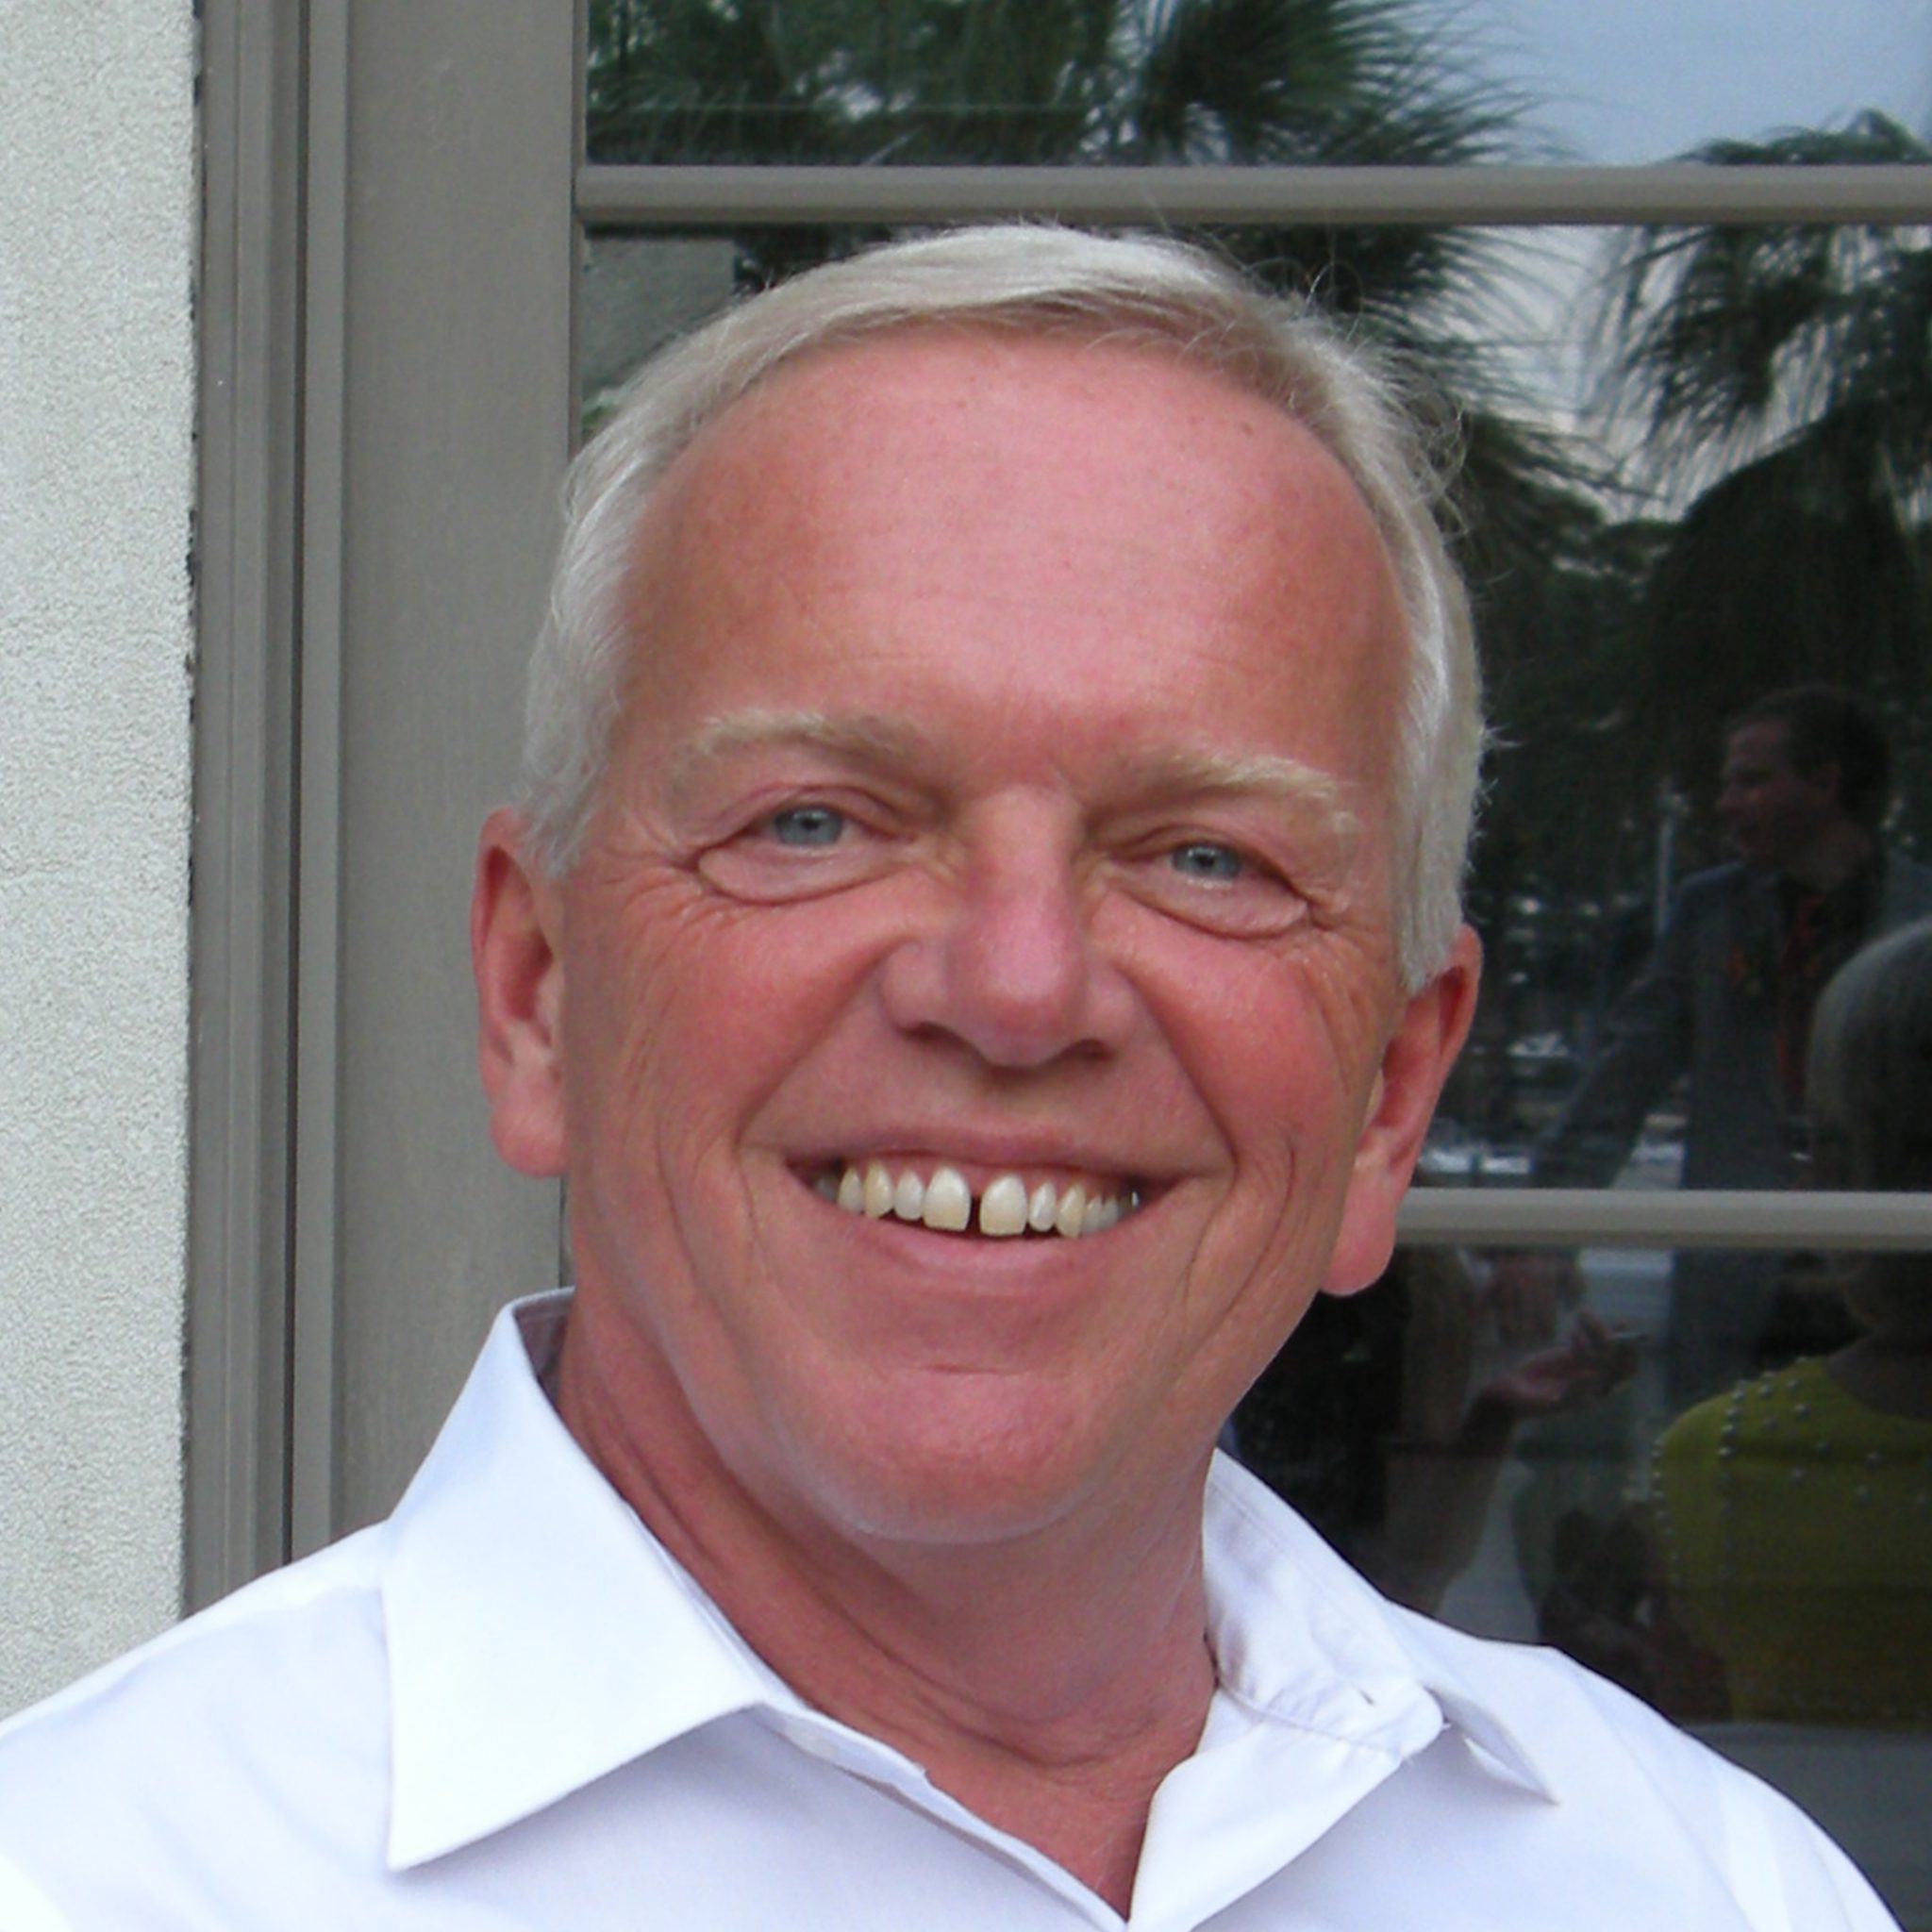 MAPtech Packaging Founder